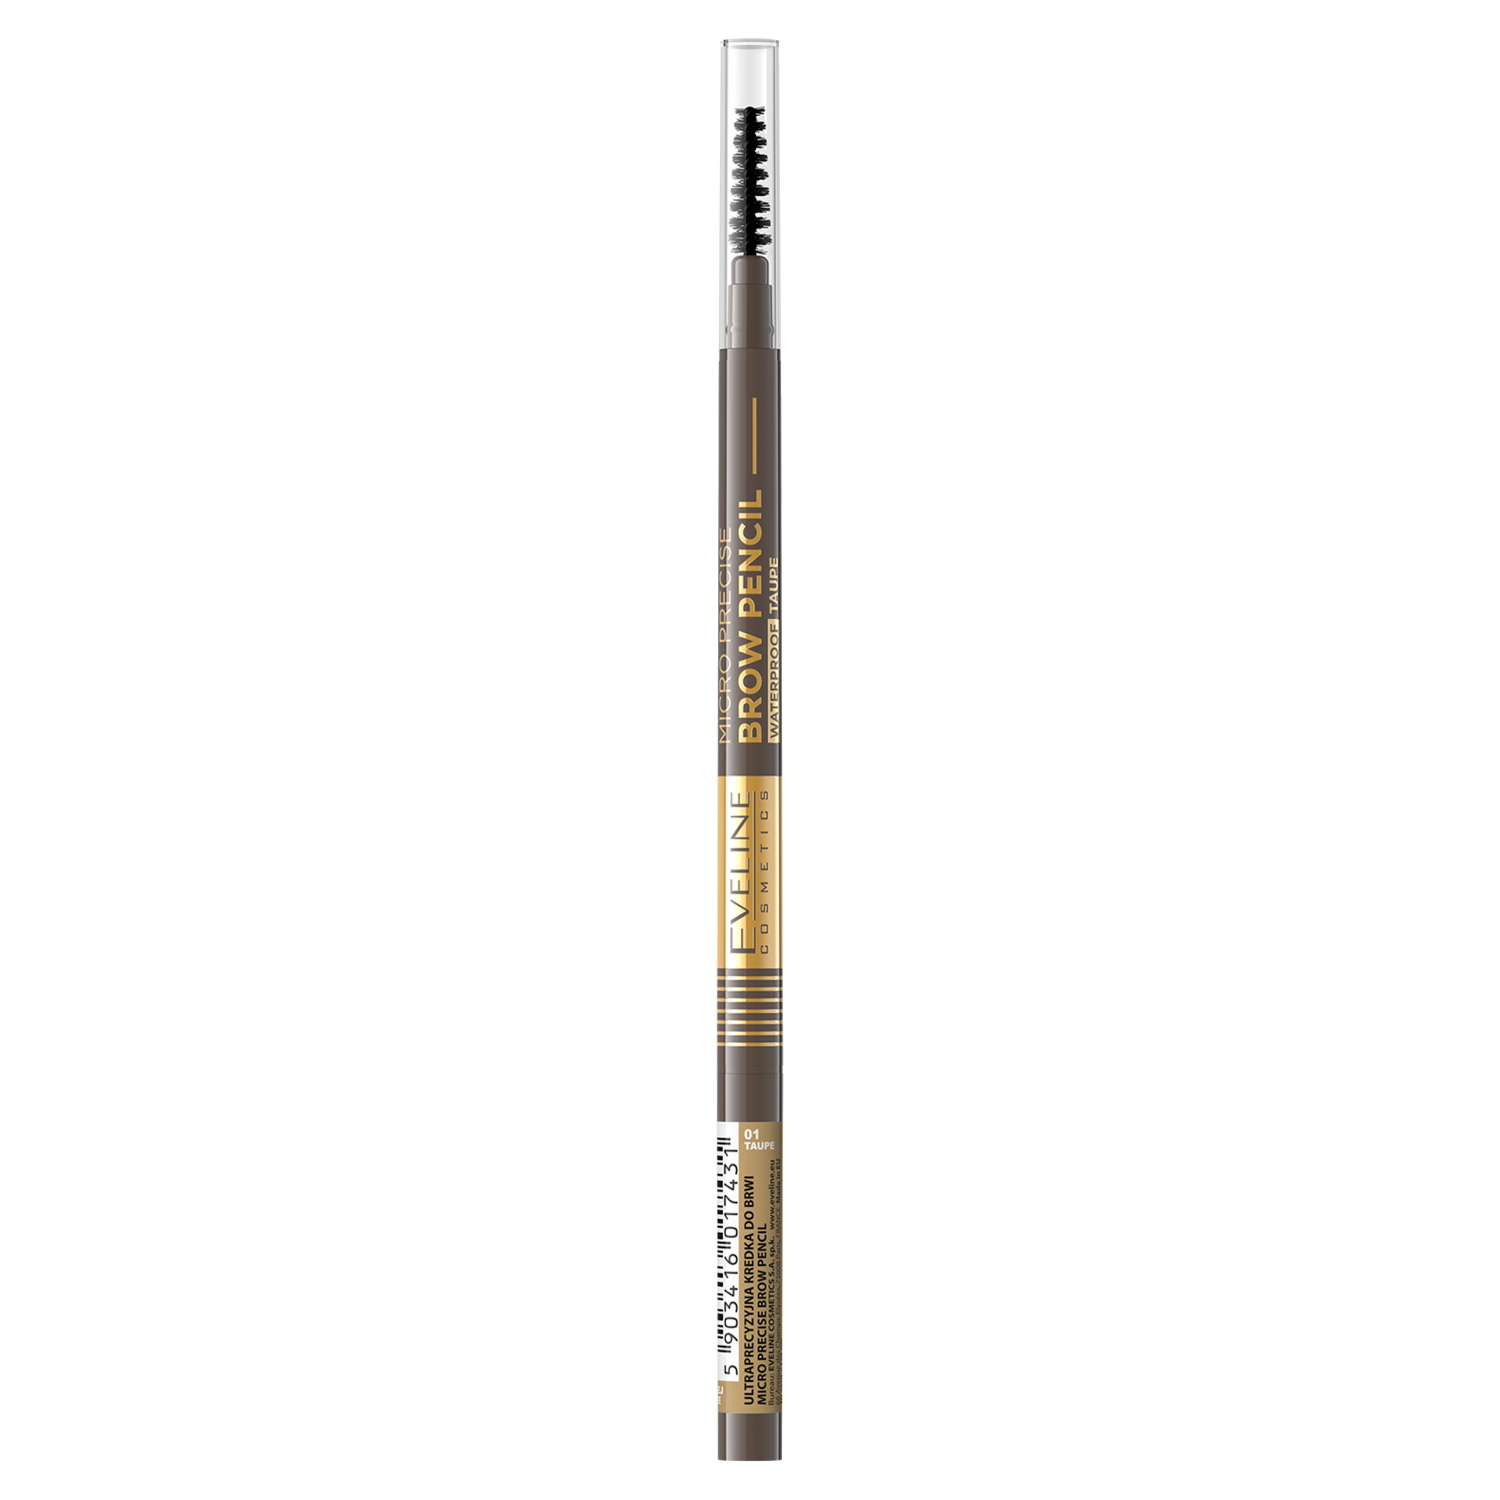 Eveline Cosmetics Brow Pencil Taupe Taupe Taupe kredka do brwi 01 taupe, 4  g | hebe.pl